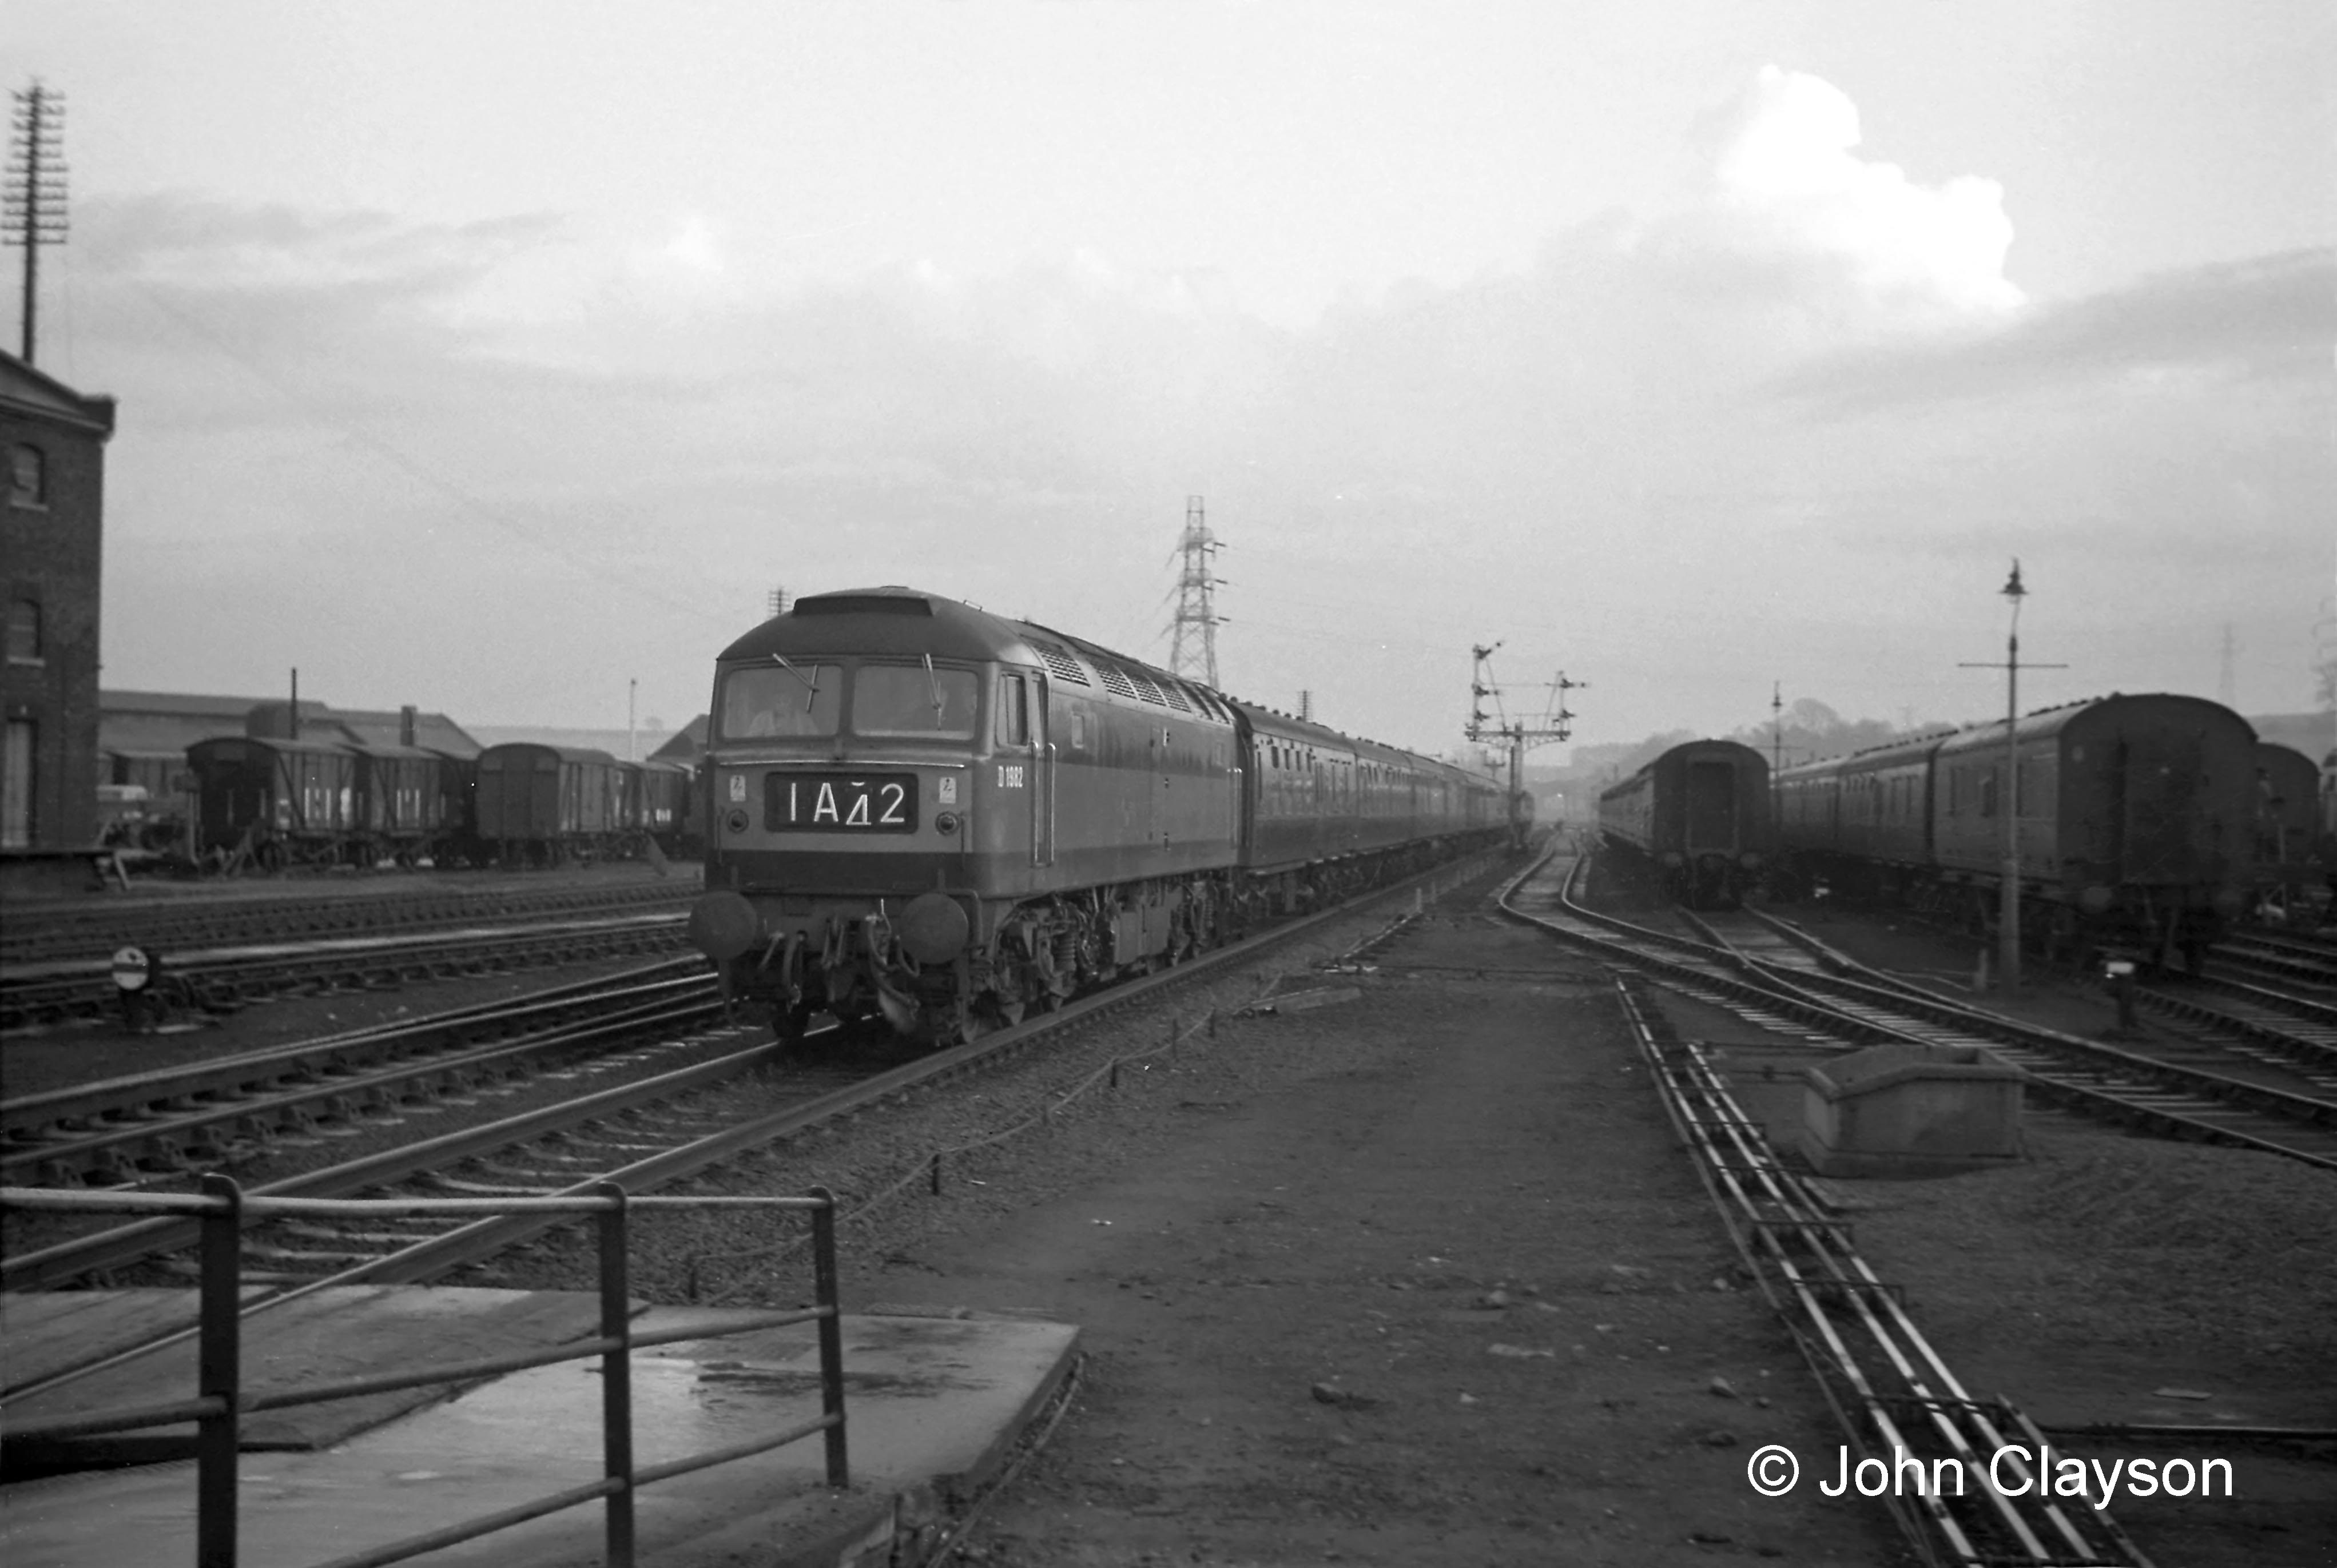 This view of 6th February 1966 shows that, in the area controlled by the Yard Box, all points and crossings have been removed from the Down Main line on which the train is approaching. The Down Slow line, to the train's right, is accessed at Grantham South. No.1 and No.2 carriage sidings still appear to be fully occupied. Train 1A42 was the 3pm departure from King's Cross for Newcastle, hauled on this occasion by Brush Type 4 locomotive No.D1982. Photograph by John Clayson